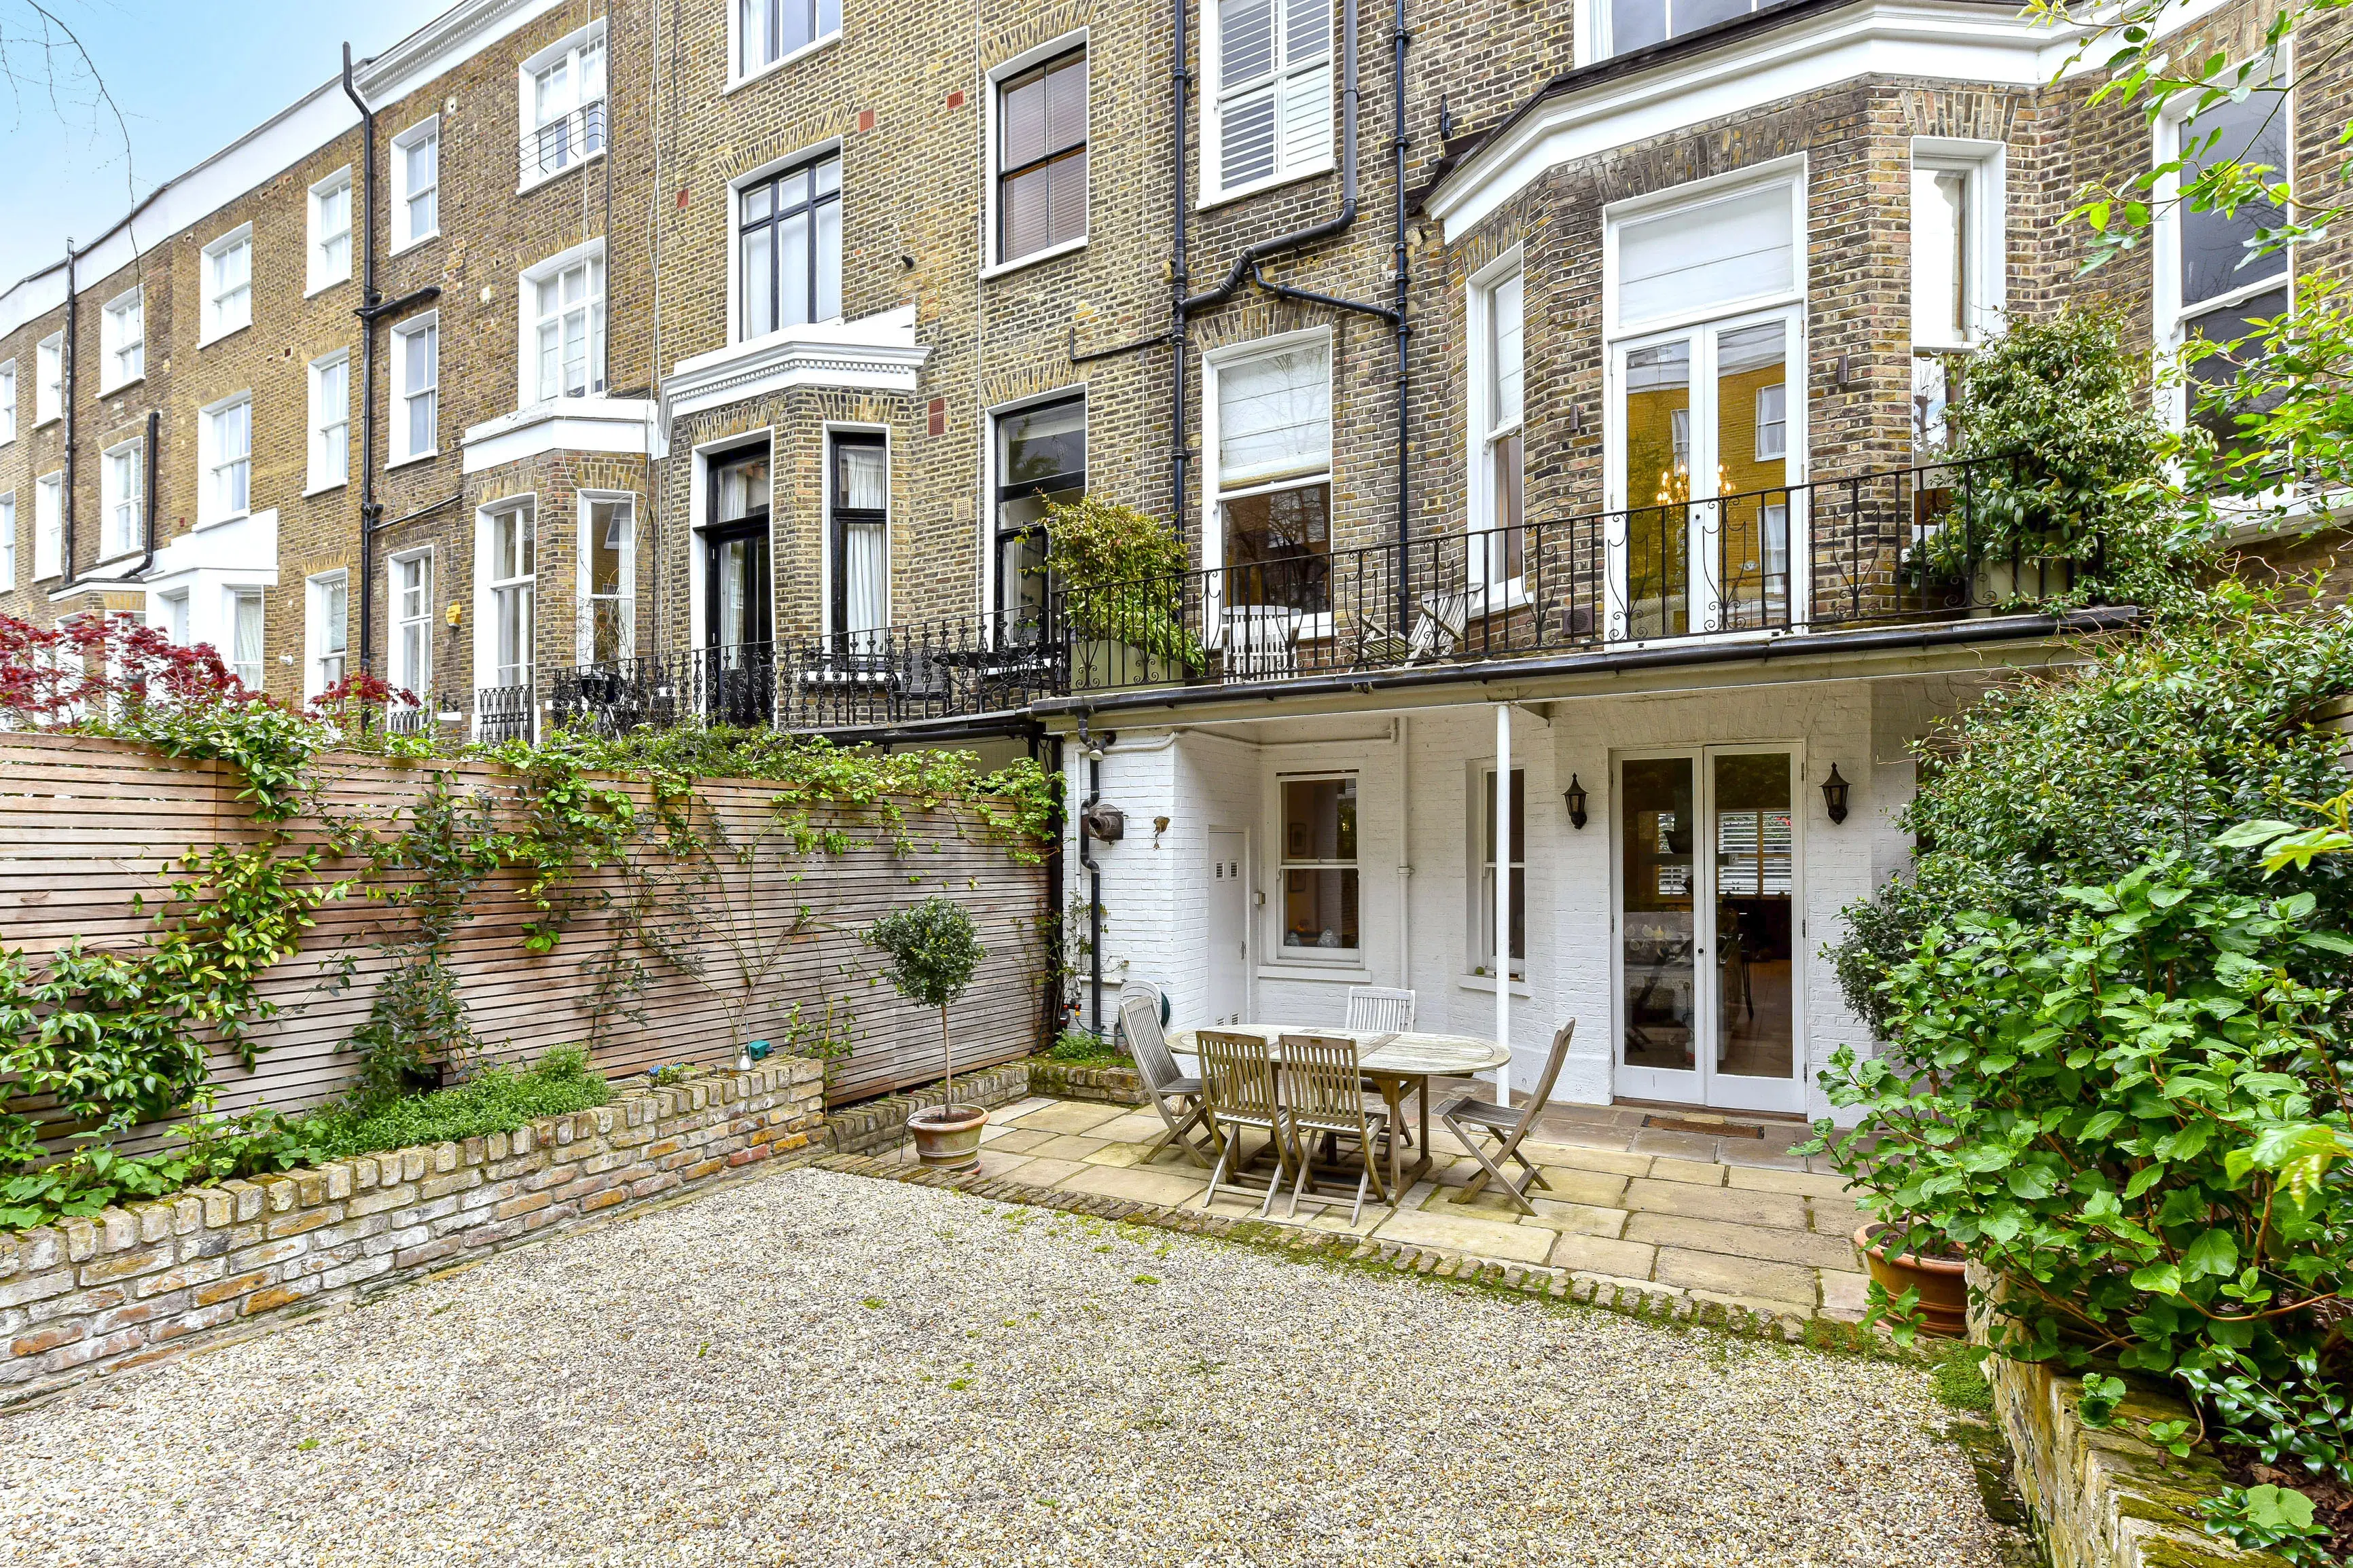 Palace Gardens Terrace , holiday home in Kensington, London